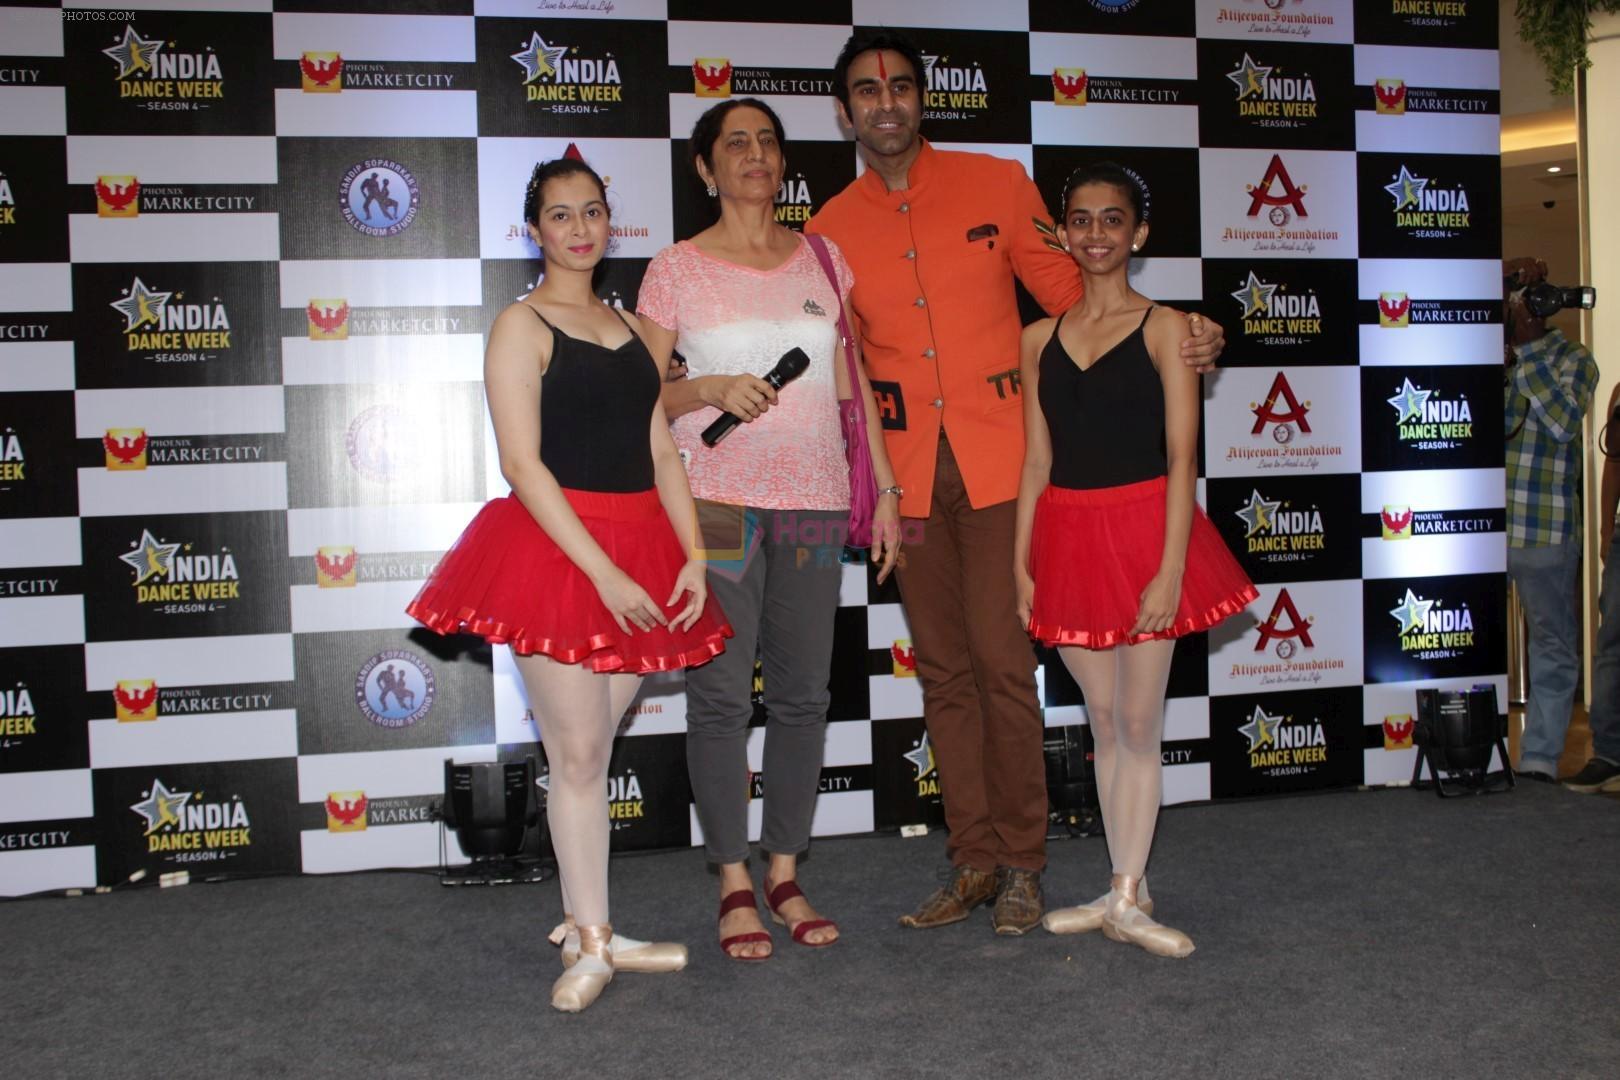 Sandip Soparkarr At India's First Dance Week Season 4 on 12th April 2017